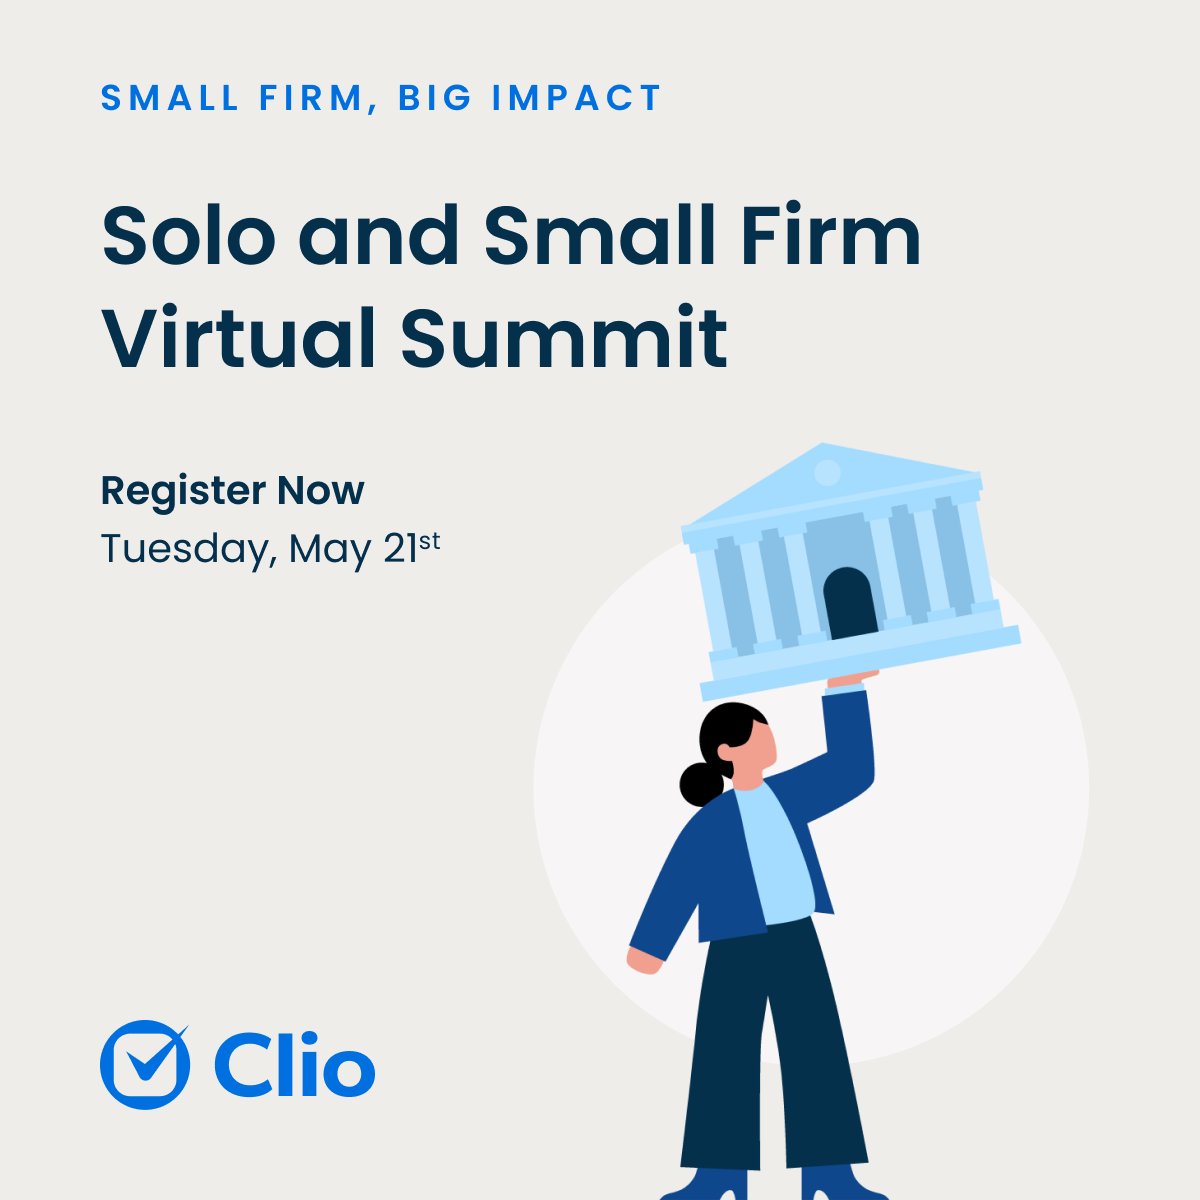 Clio’s 𝗦𝗼𝗹𝗼 𝗮𝗻𝗱 𝗦𝗺𝗮𝗹𝗹 𝗙𝗶𝗿𝗺 𝗩𝗶𝗿𝘁𝘂𝗮𝗹 𝗦𝘂𝗺𝗺𝗶𝘁 is returning on Tuesday, May 21 and you’re invited. 🗓️ Save your spot for this action-packed half-day event ➡️ bit.ly/448lwbD